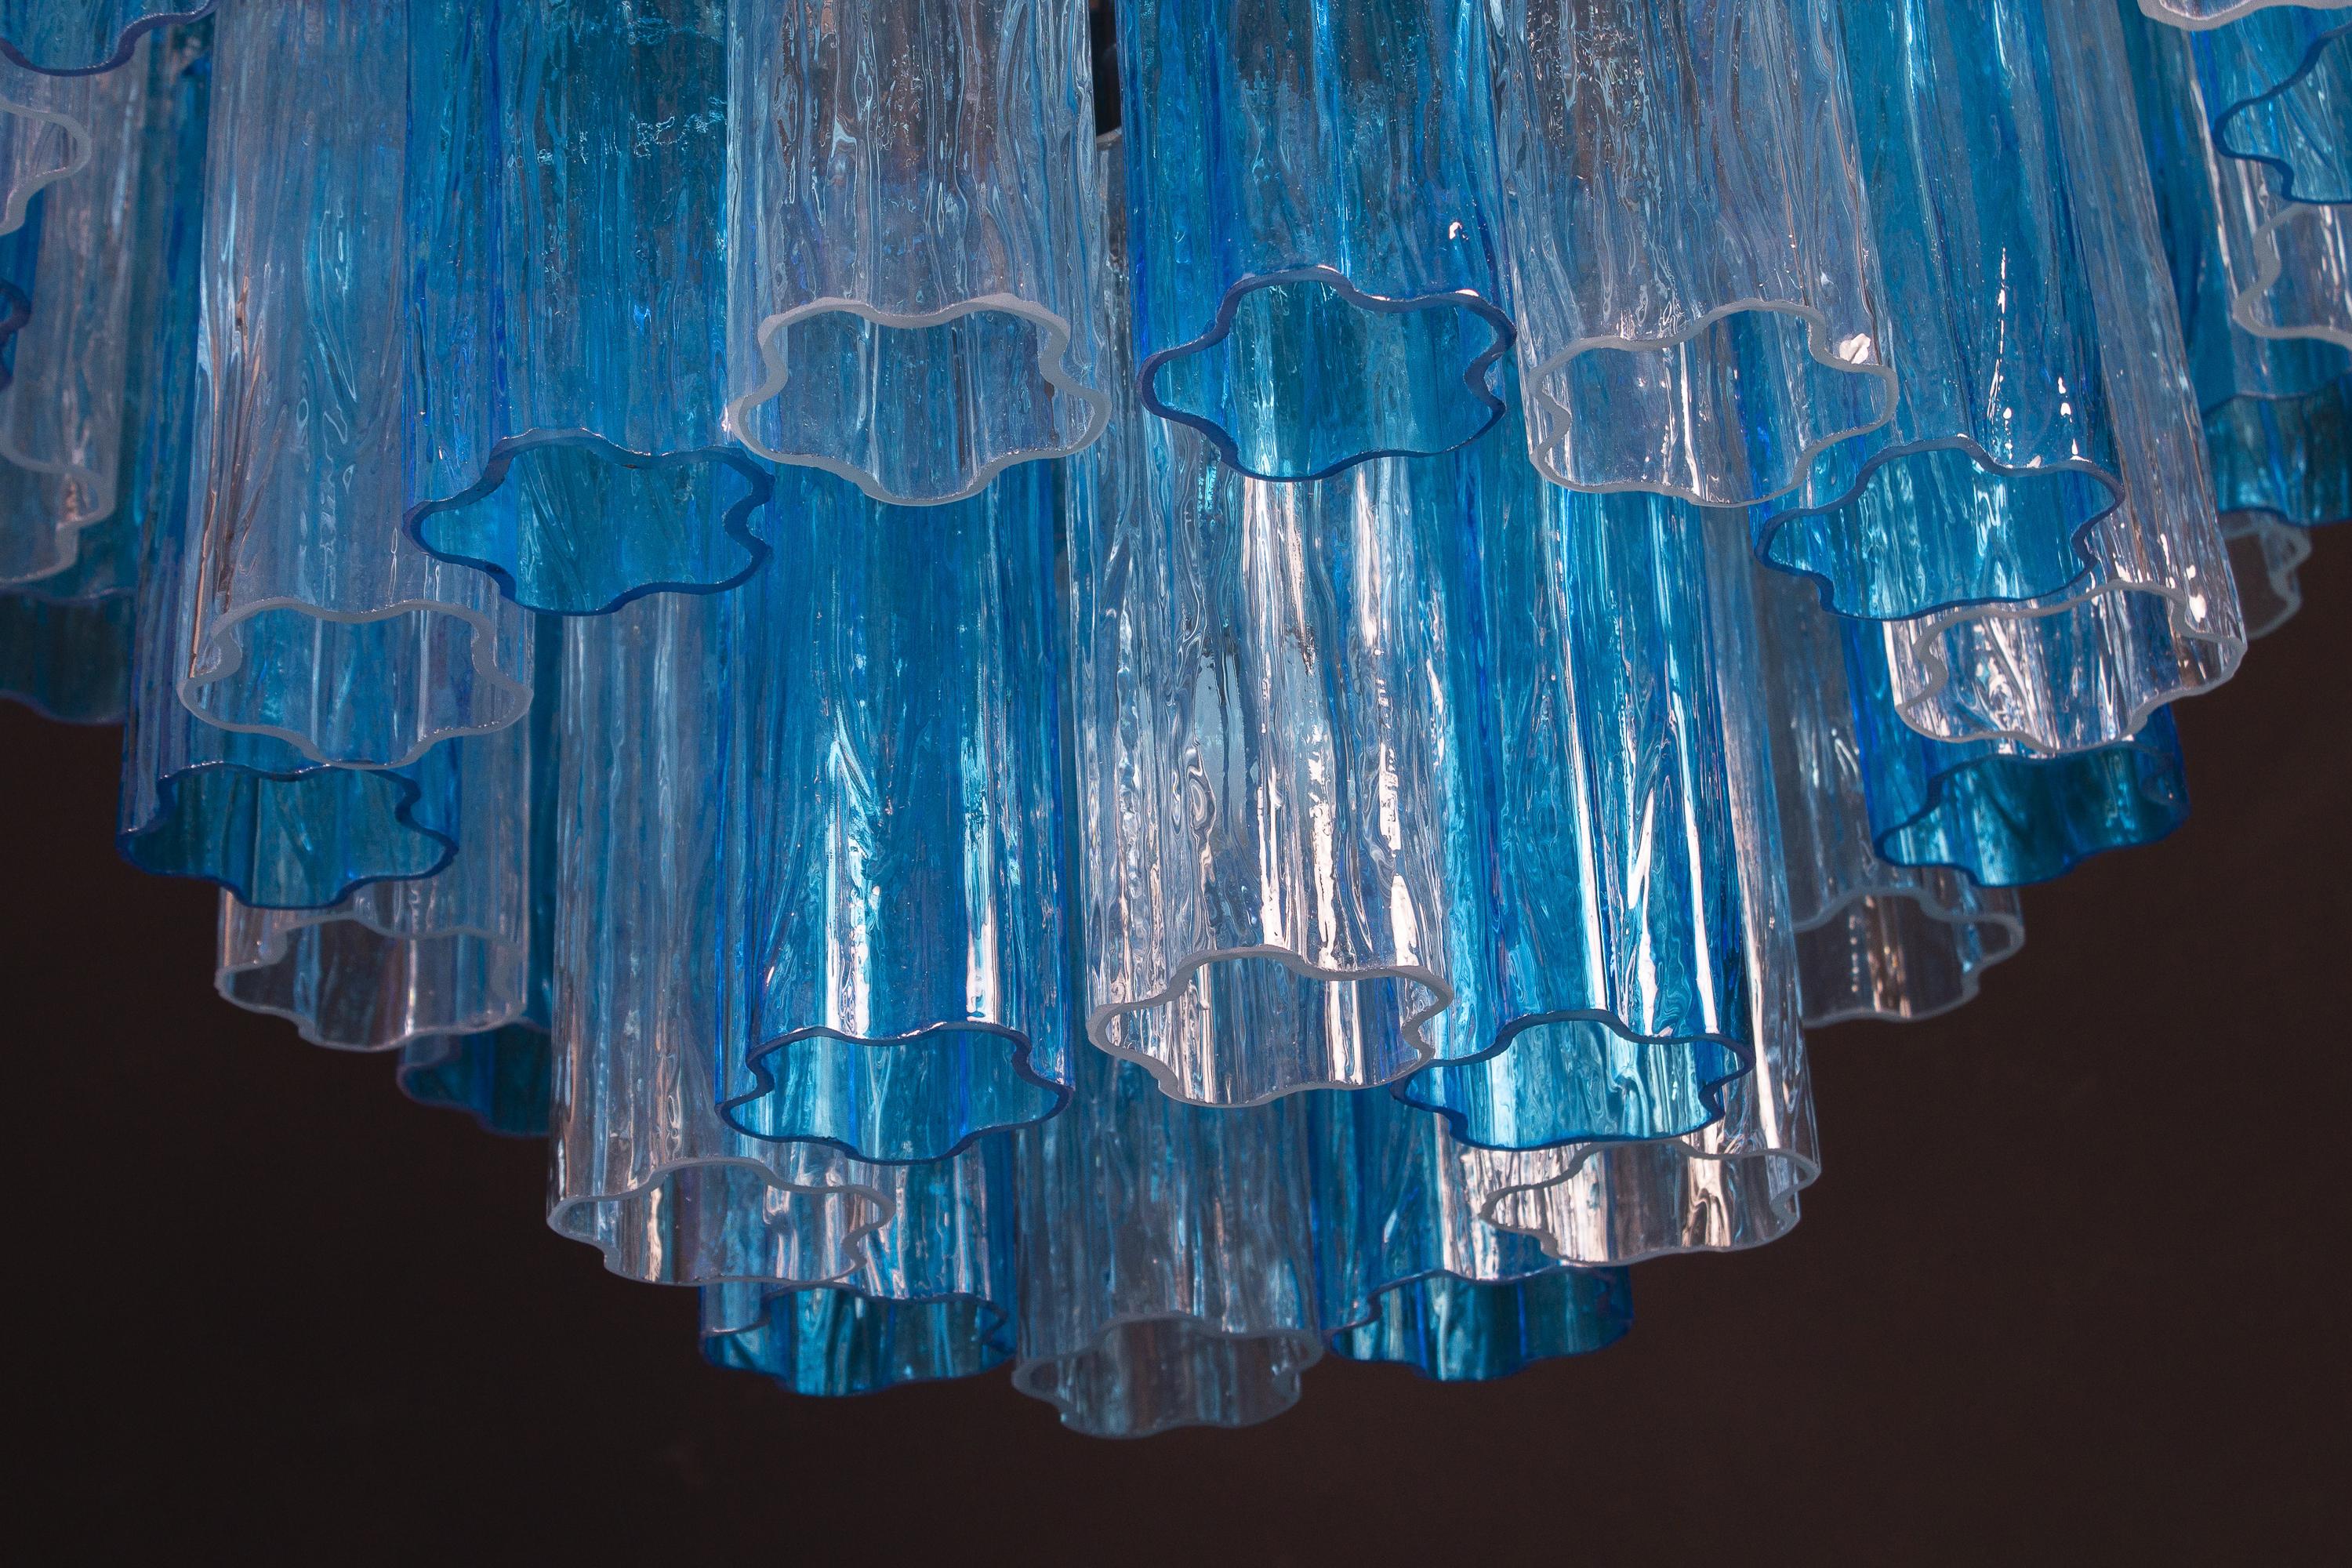 Blu Turquoise and Ice Color Murano Glass Tronchi Chandelier Ceiling Light For Sale 1